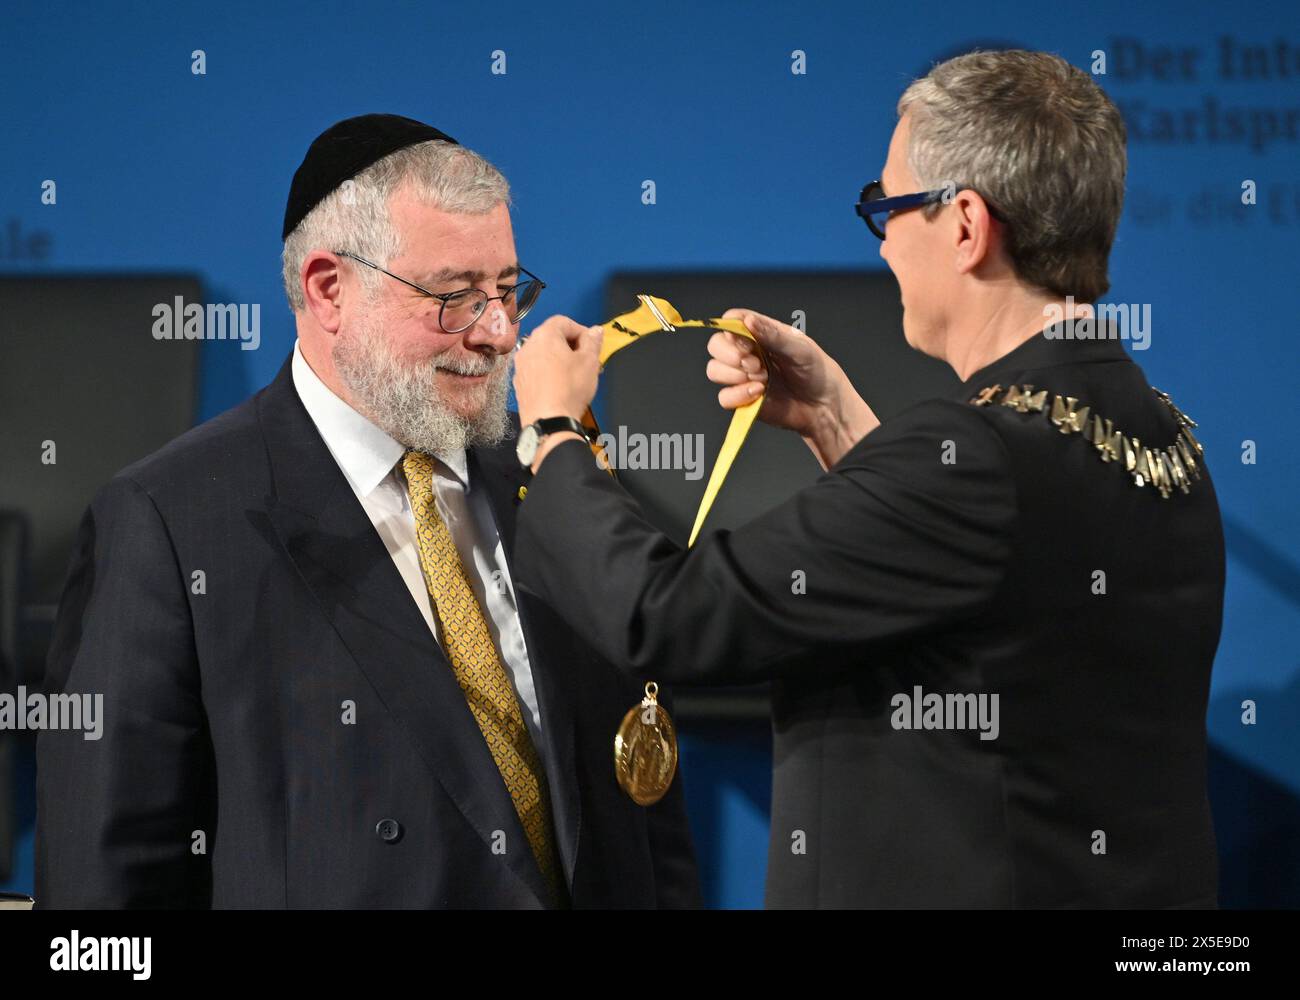 Aachen, Germany. 09th May, 2024. Chief Rabbi Pinchas Goldschmidt (l), President of the European Rabbinical Conference, is awarded the International Charlemagne Prize of Aachen by Aachen's Lord Mayor Sibylle Keupen (non-party). Credit: Henning Kaiser/dpa/Alamy Live News Stock Photo